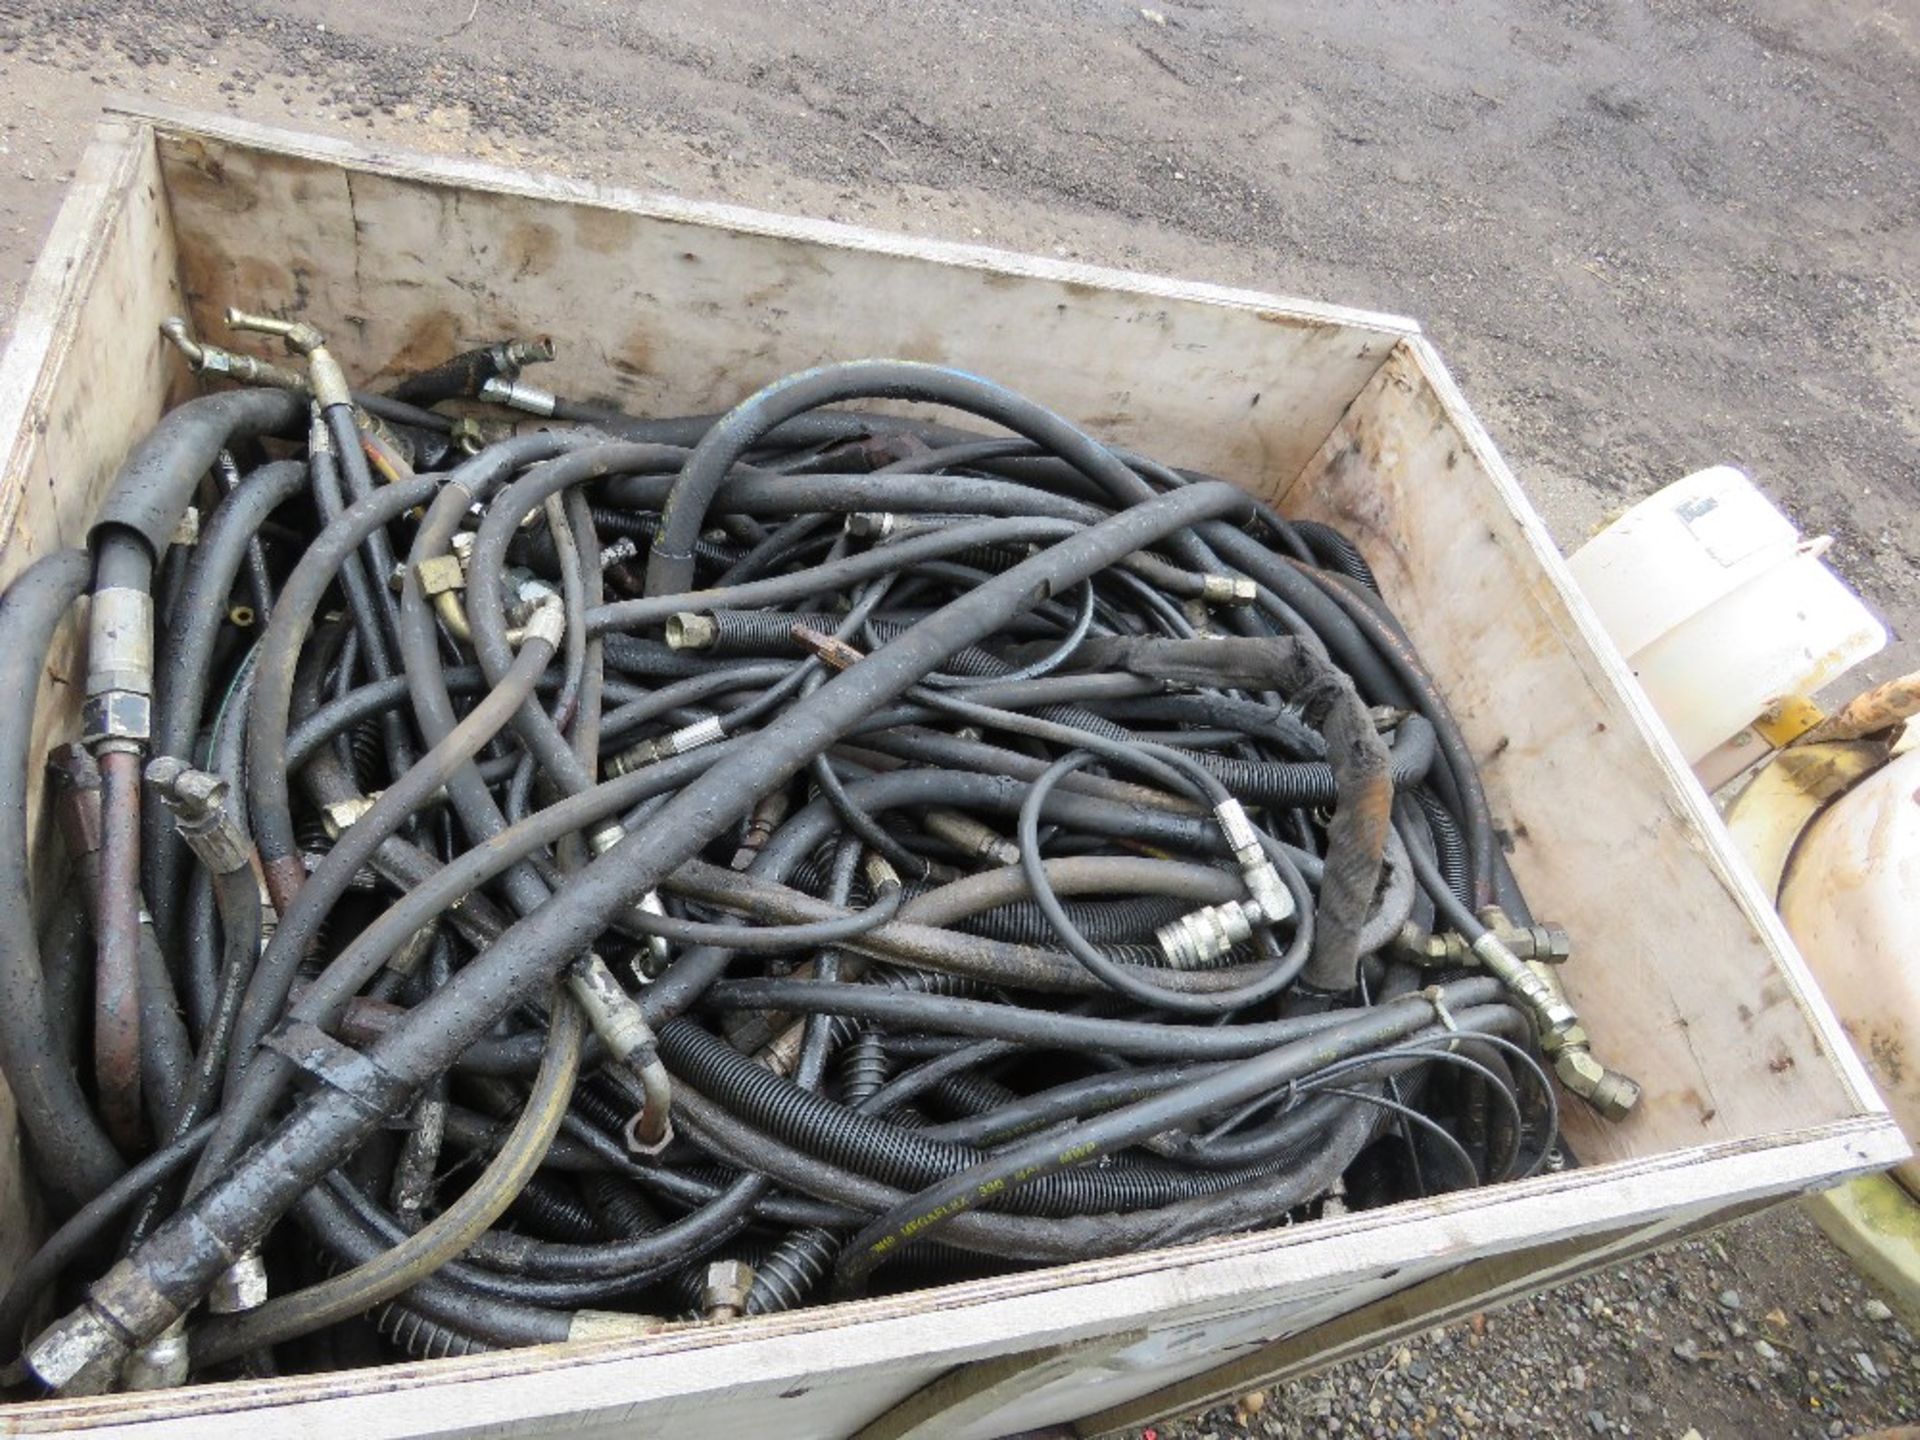 STILLAGE CONTAINING A LARGE QUANTITY OF ASSORTED HYDRAULIC HOSES. - Image 4 of 4